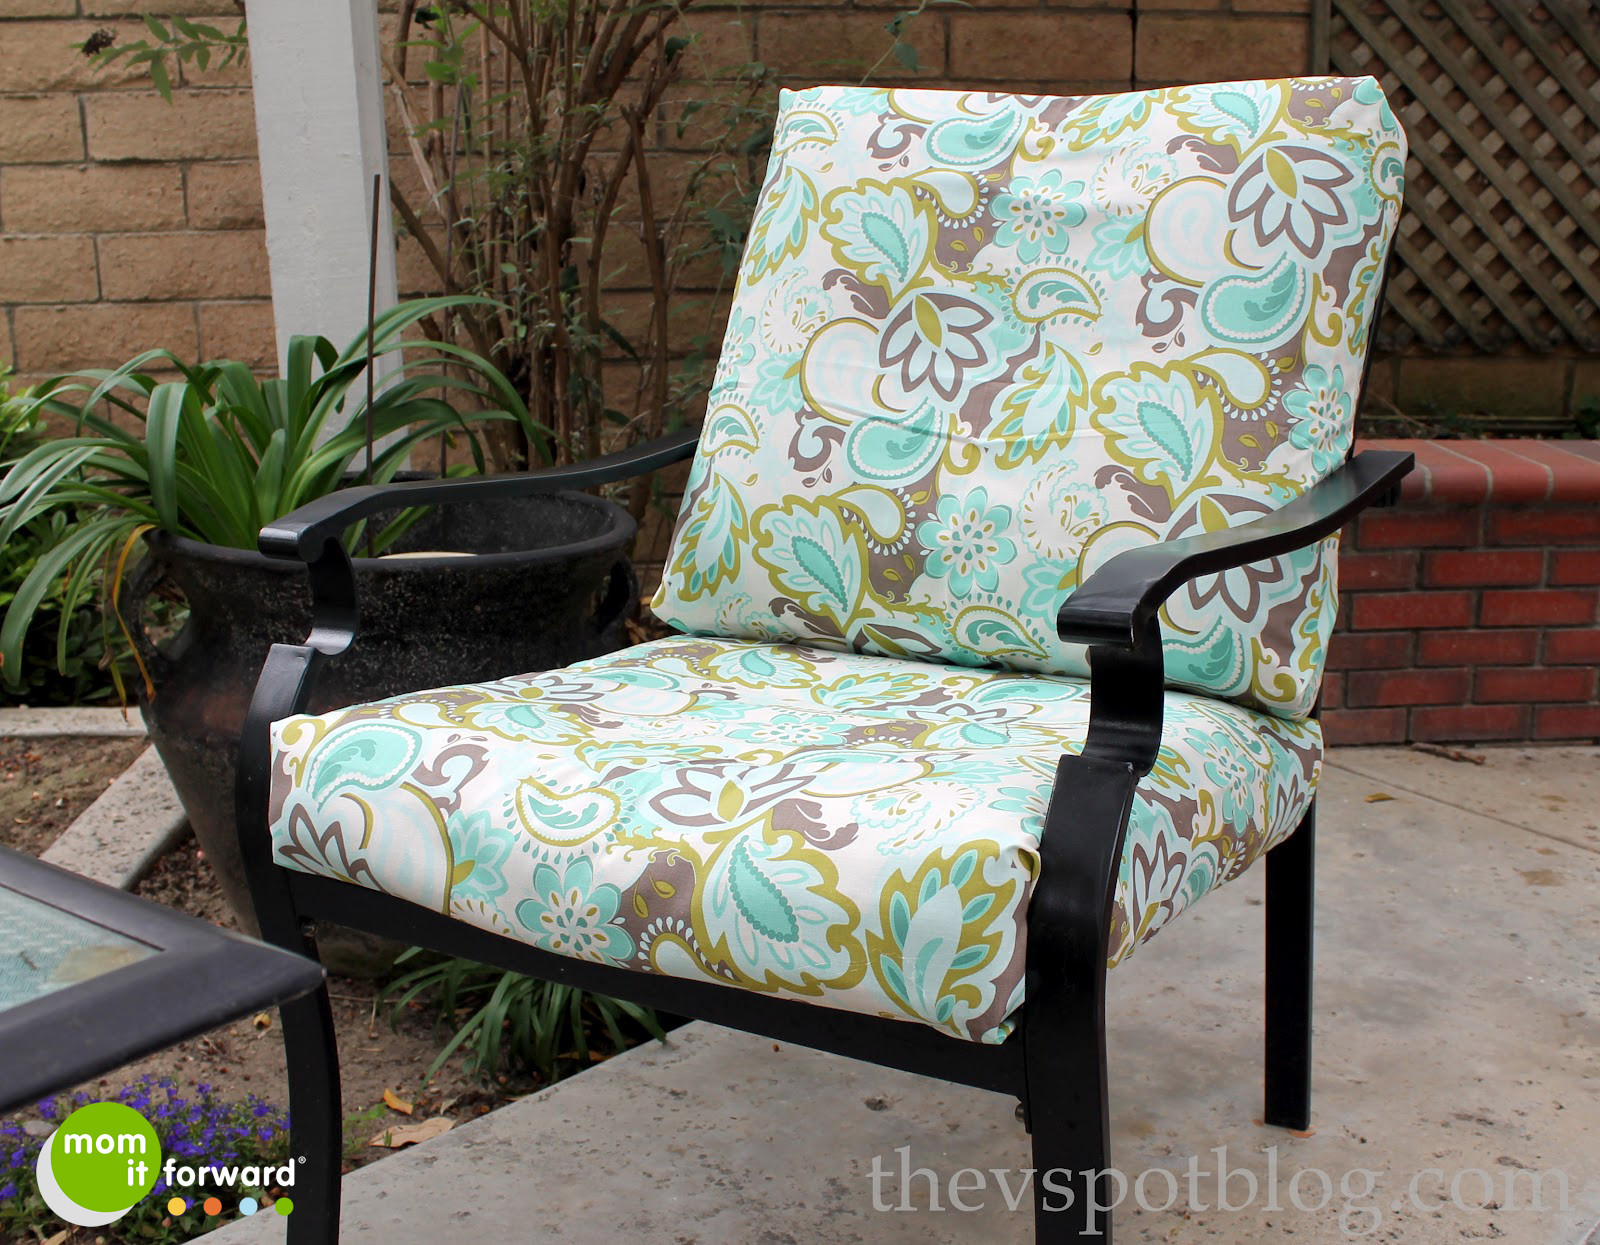 DIY Outdoor Furniture Cushions
 DIY How to Recover Outdoor Furniture With a Glue Gun